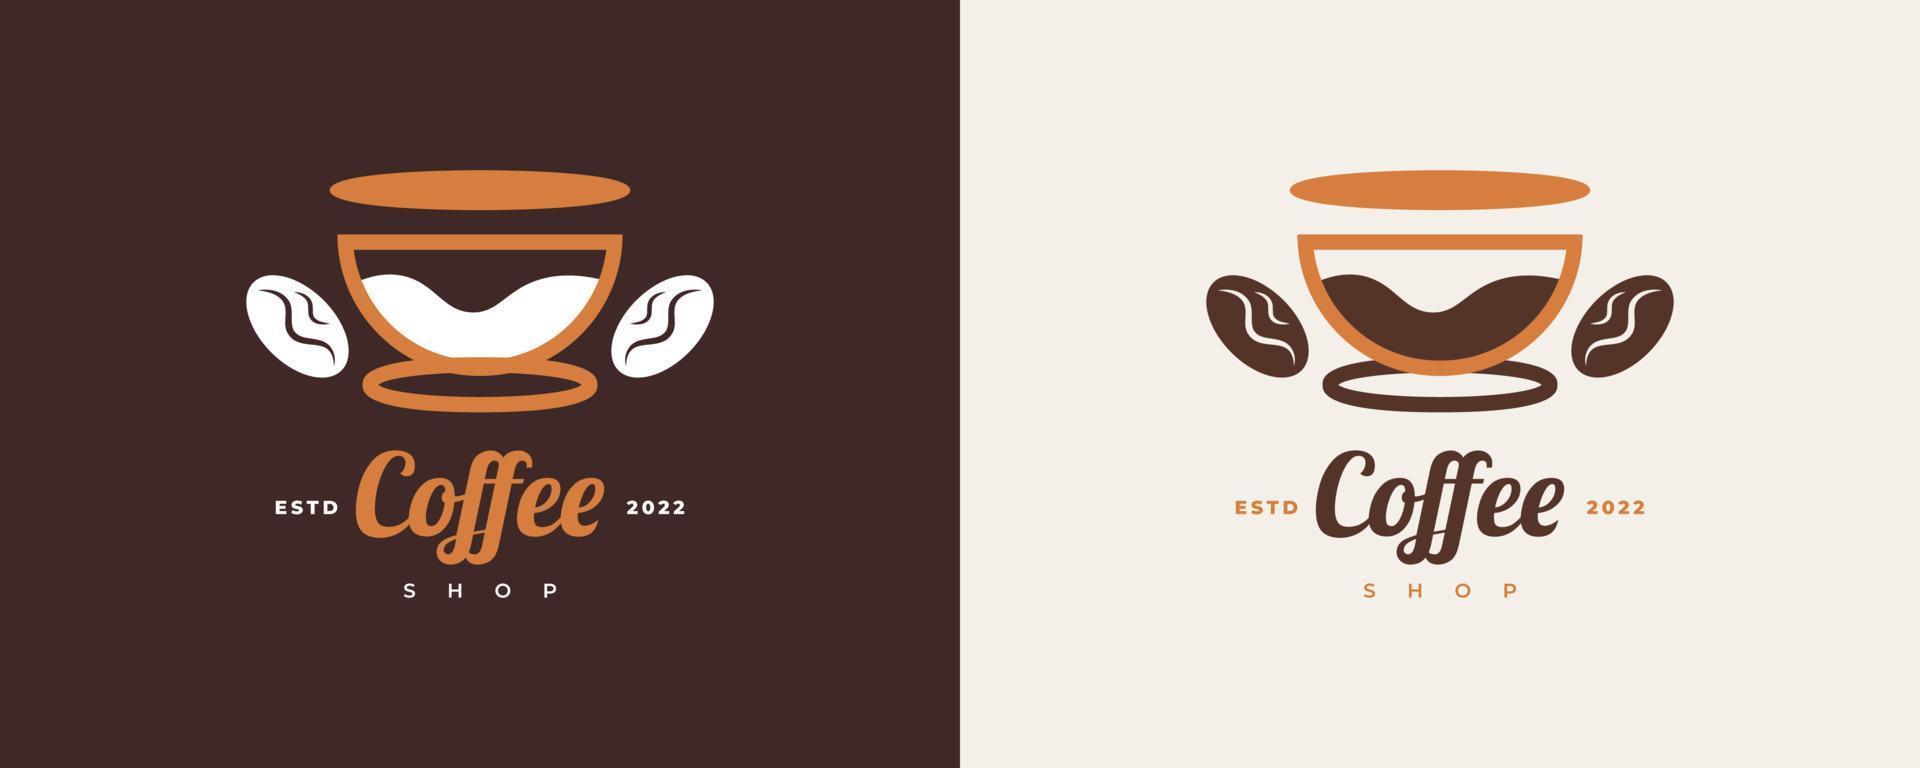 Vintage and Minimal Coffee Shop Logo. Cafe Logo or Emblem with Retro Style vector